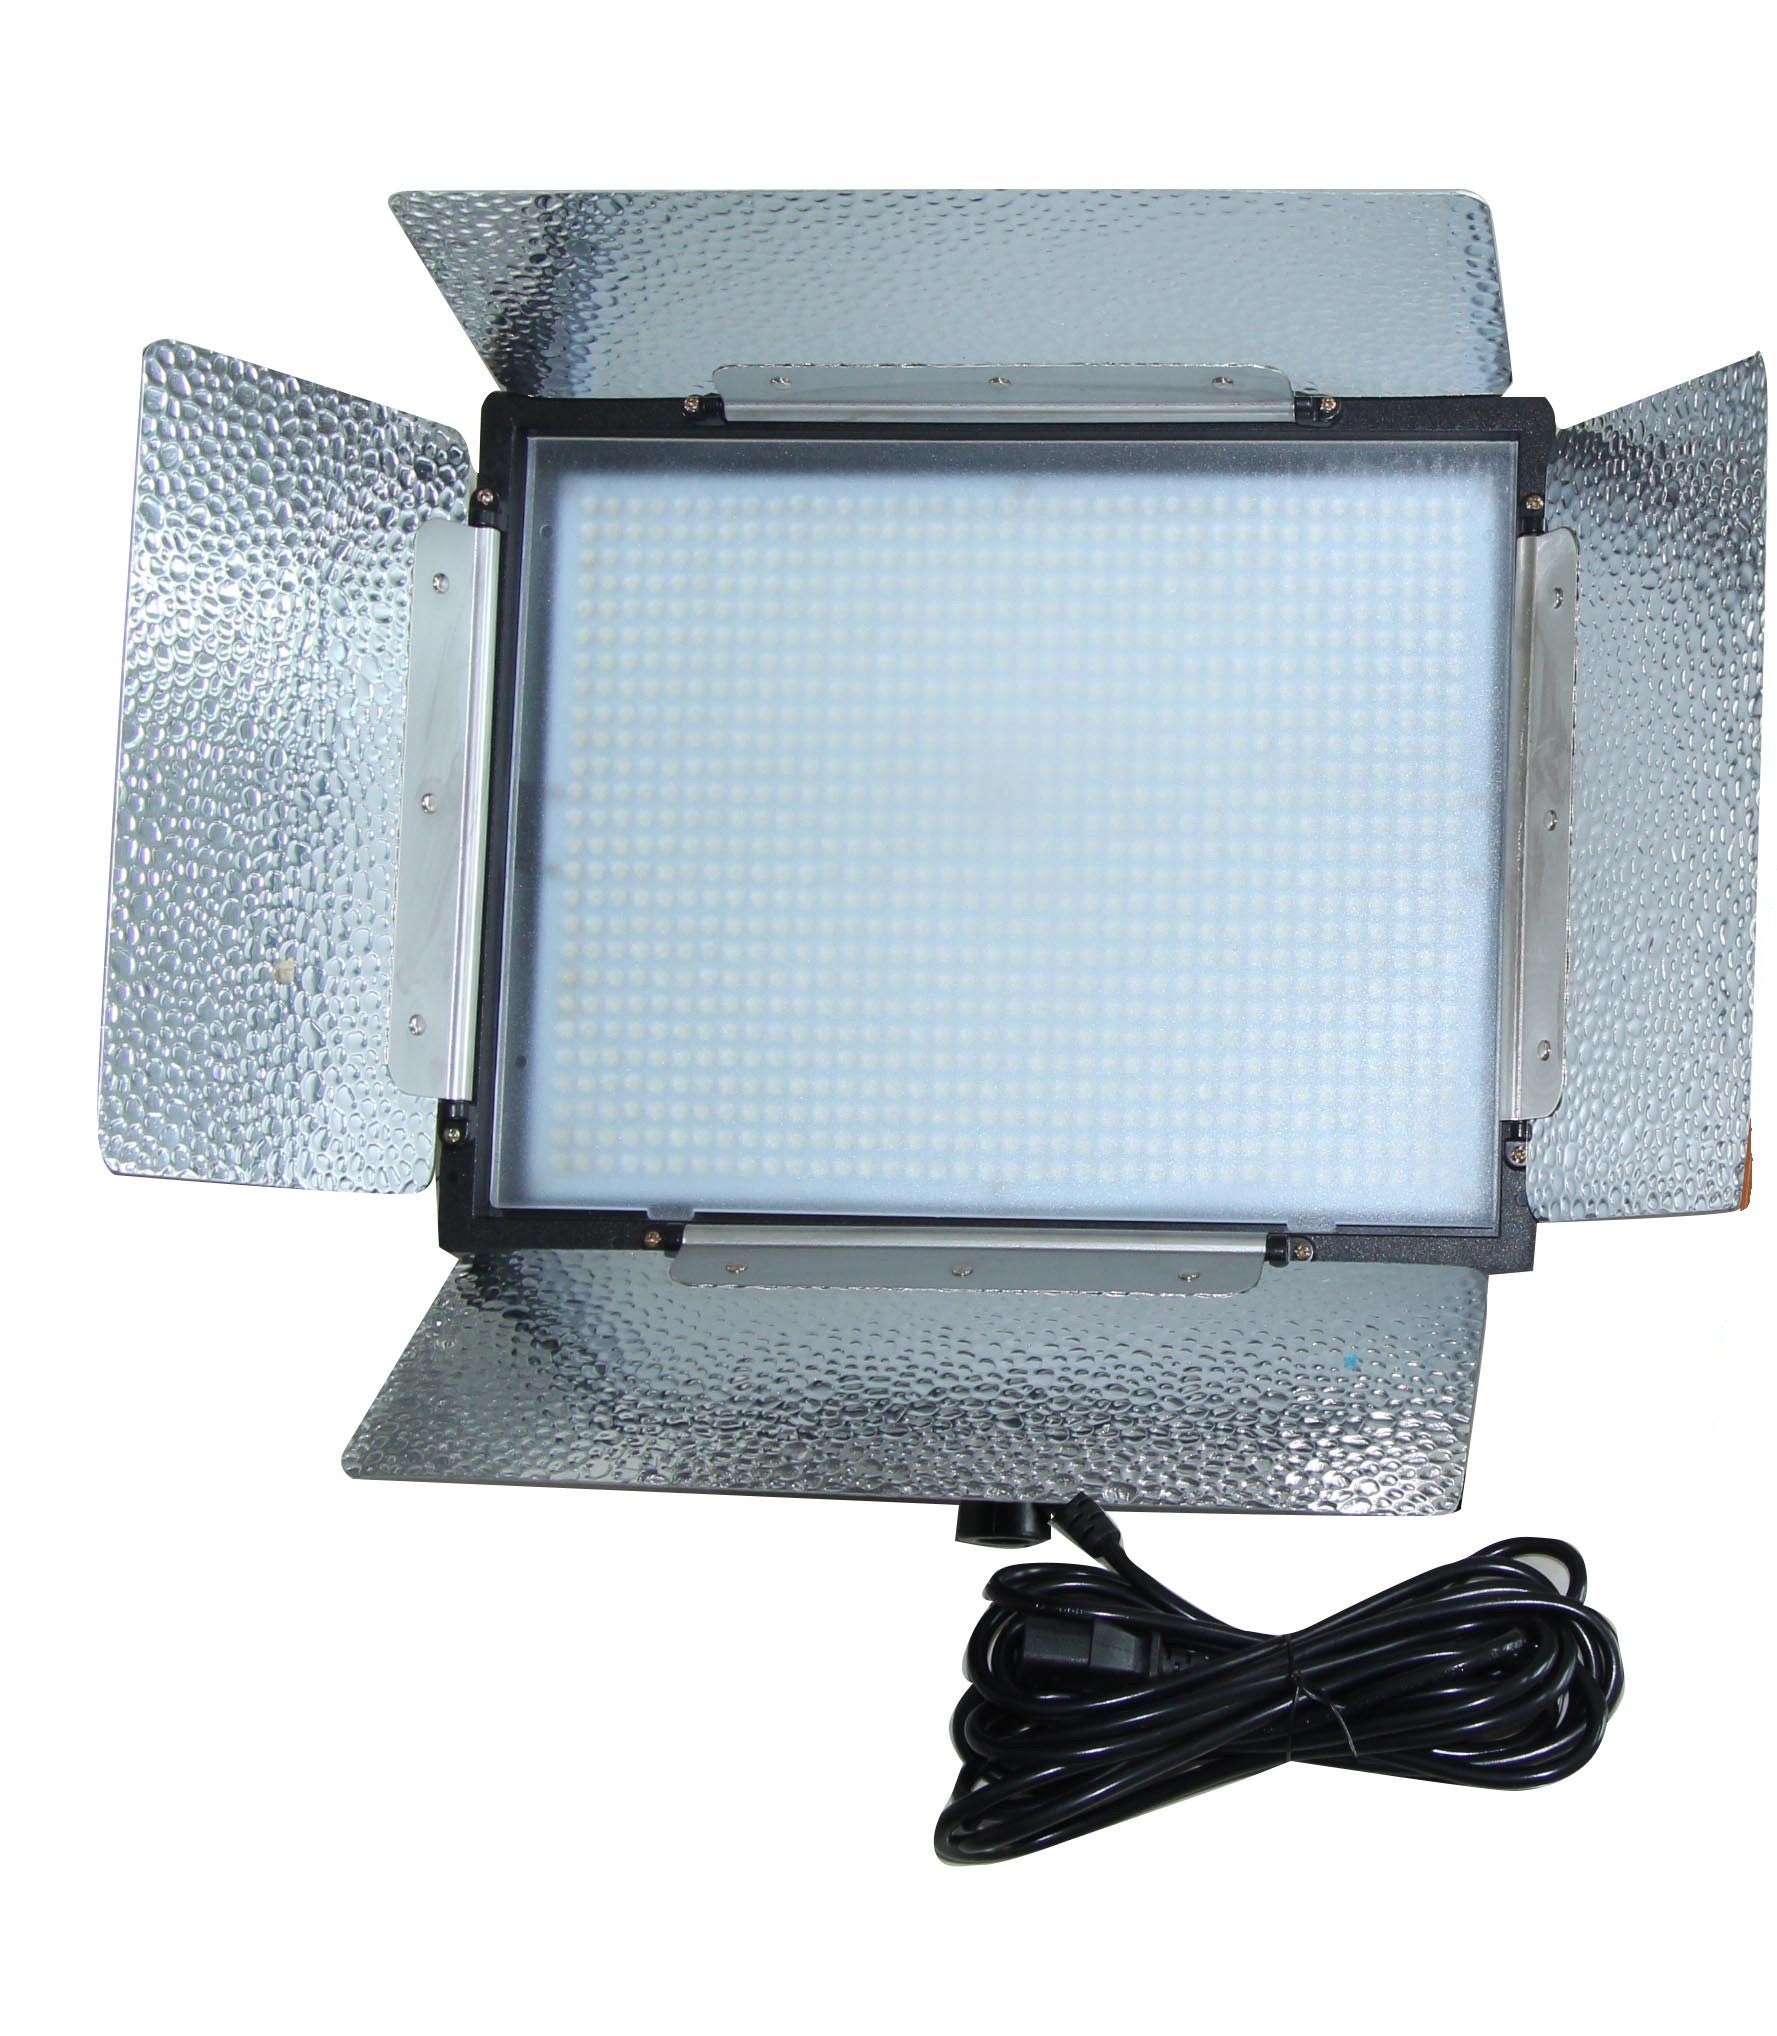 2 x 1000W LED Dimmable Video Photography Panel Studio Light and Stand